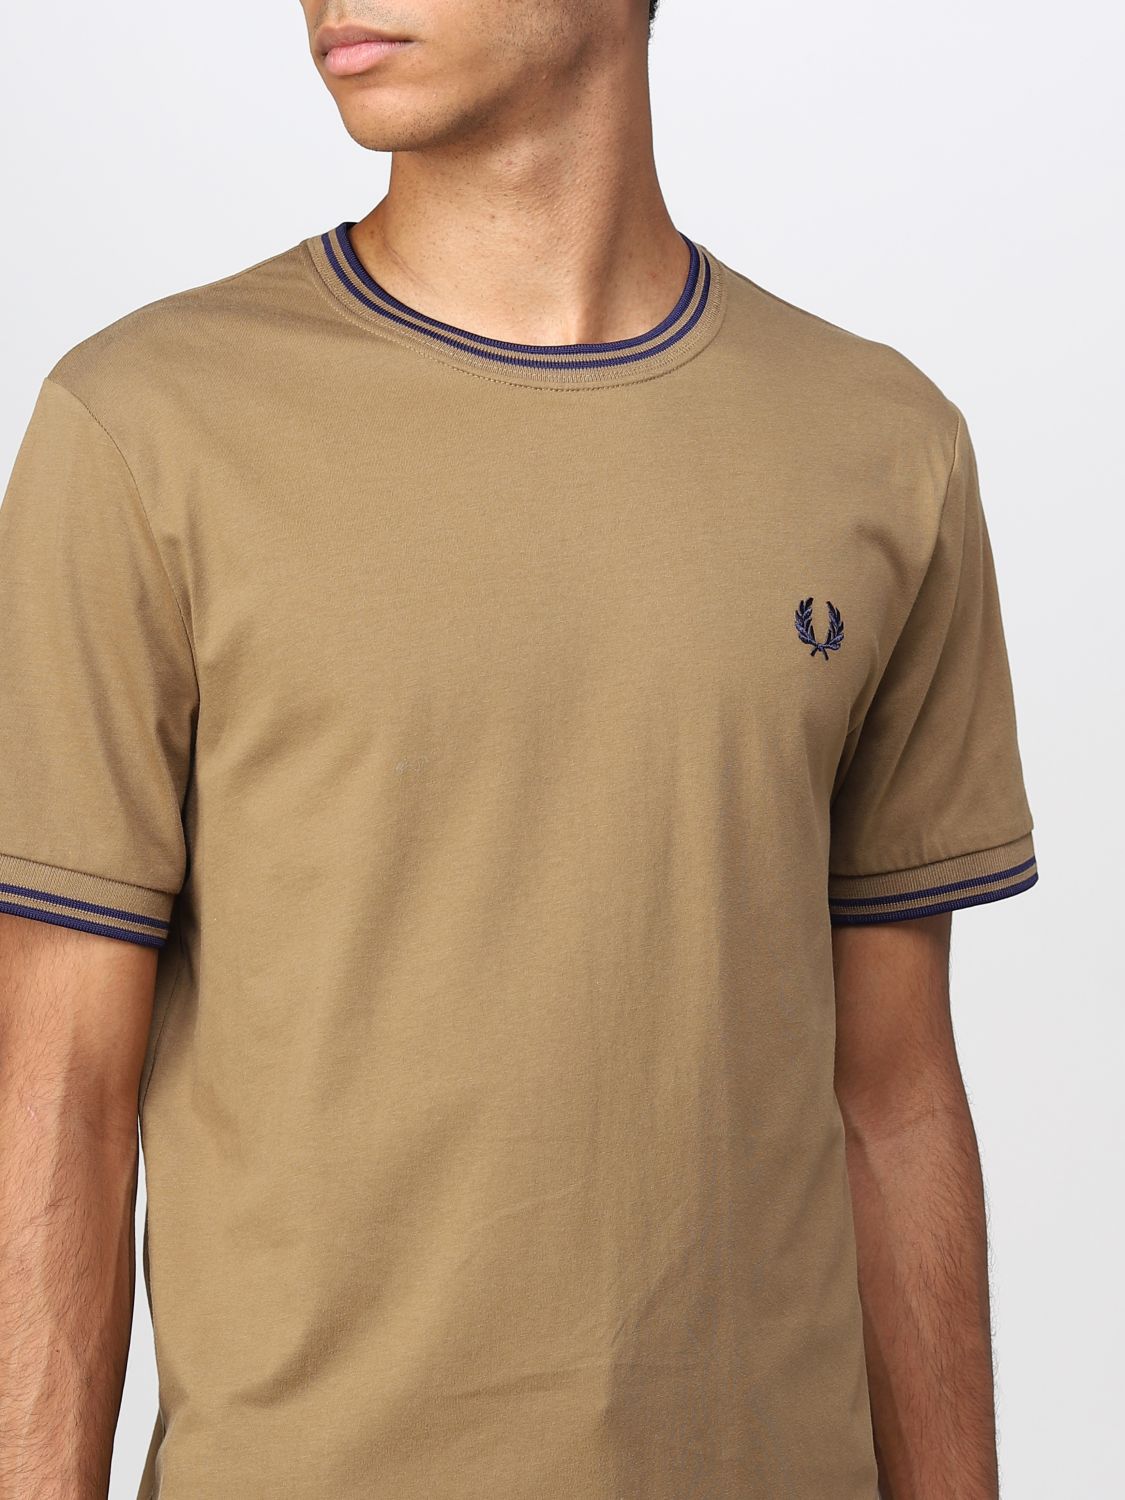 T-shirt Fred Perry: T-shirt Fred Perry con mini logo ricamato marrone 3